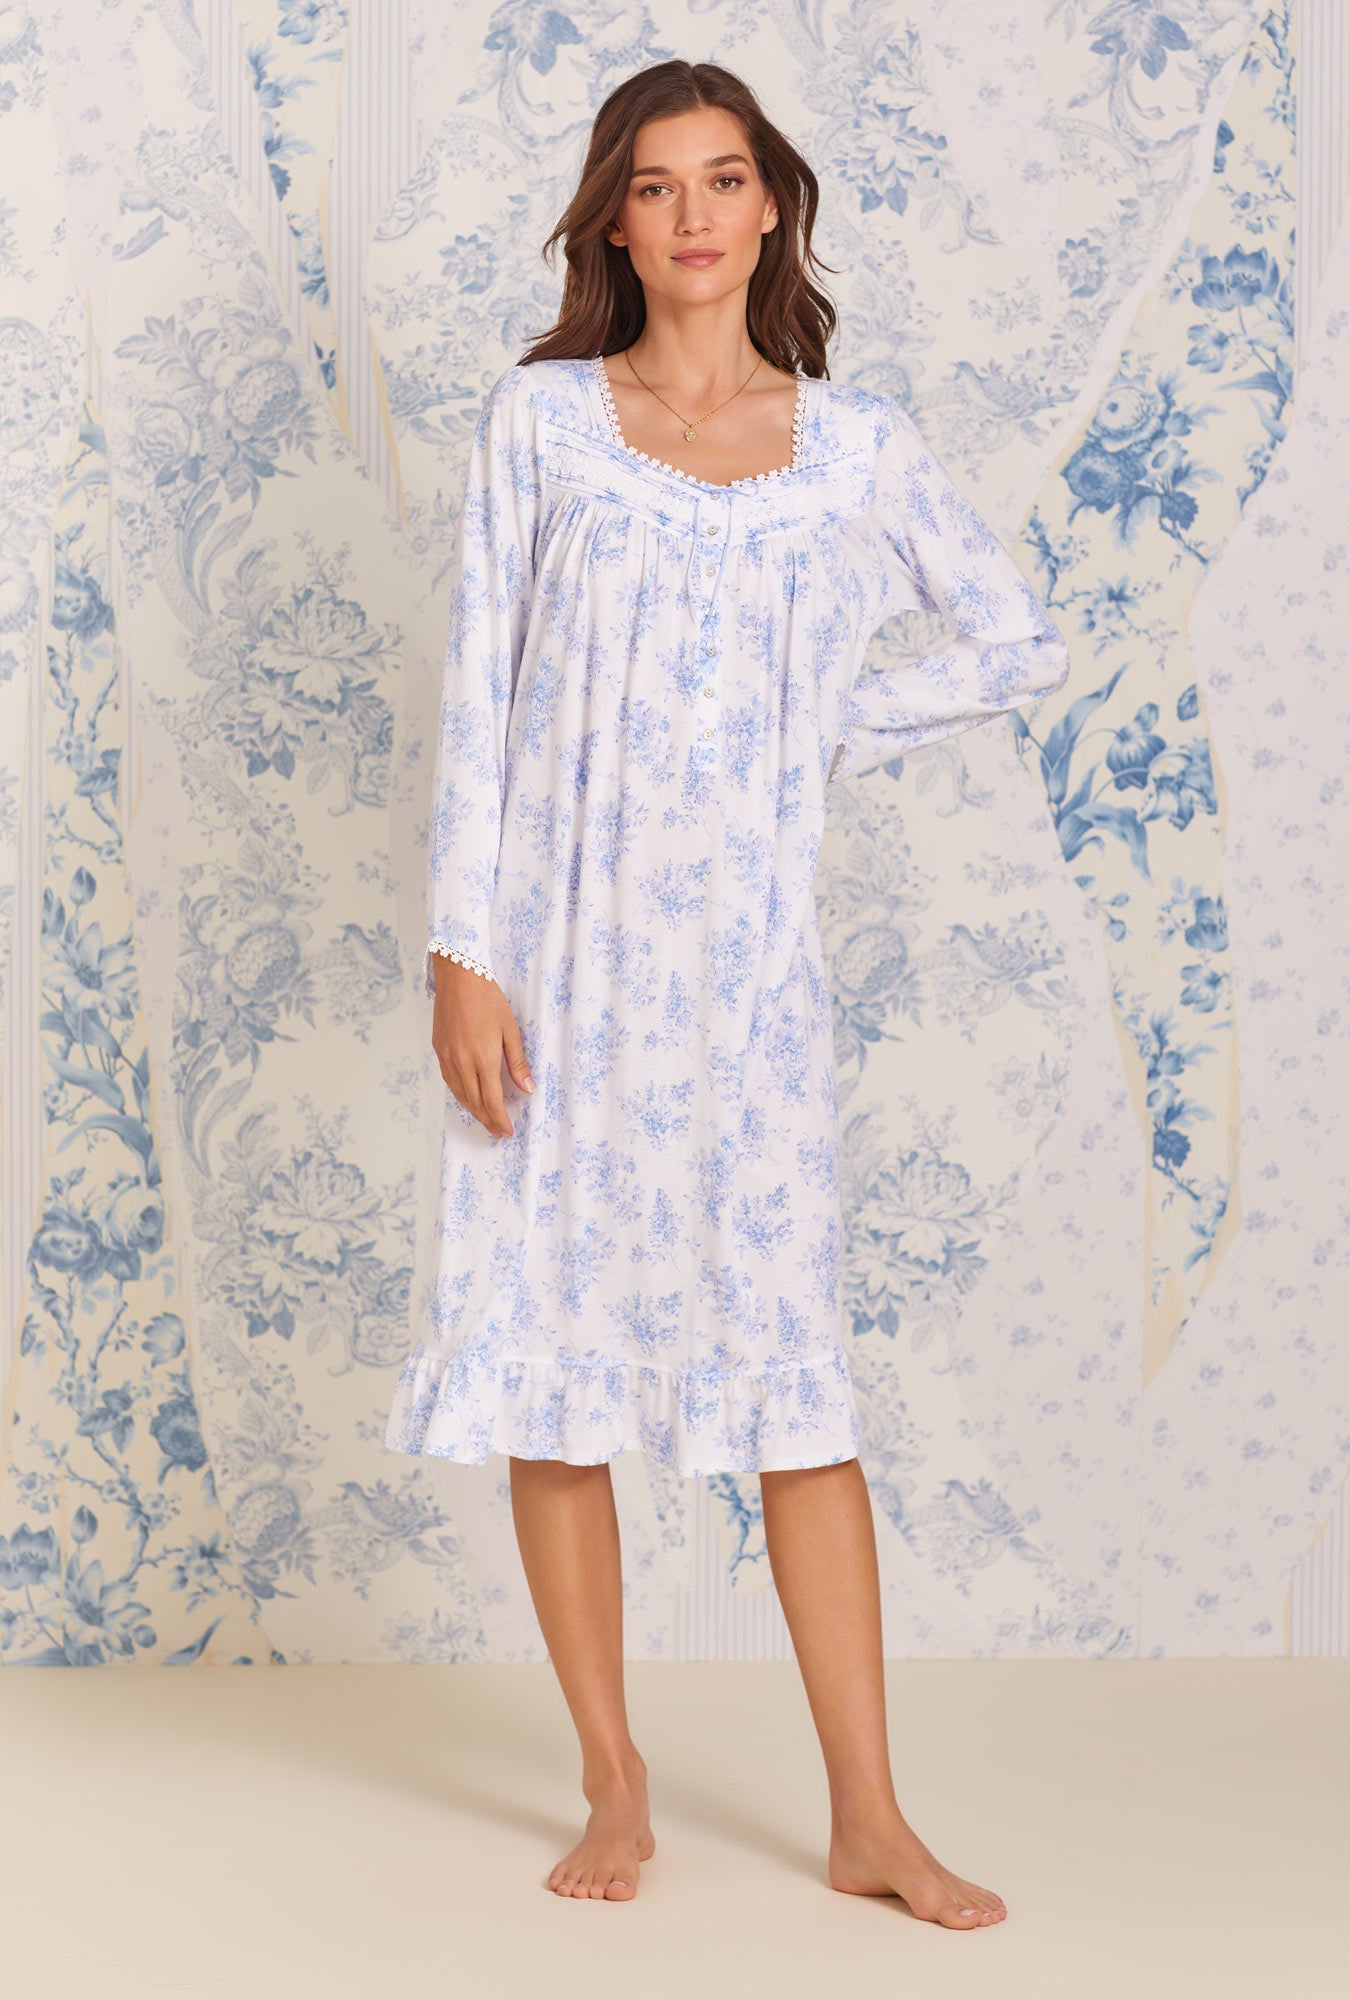 A lady wearing blue  Long Sleeve Nightgown with Whisper Blue Hydrangea print